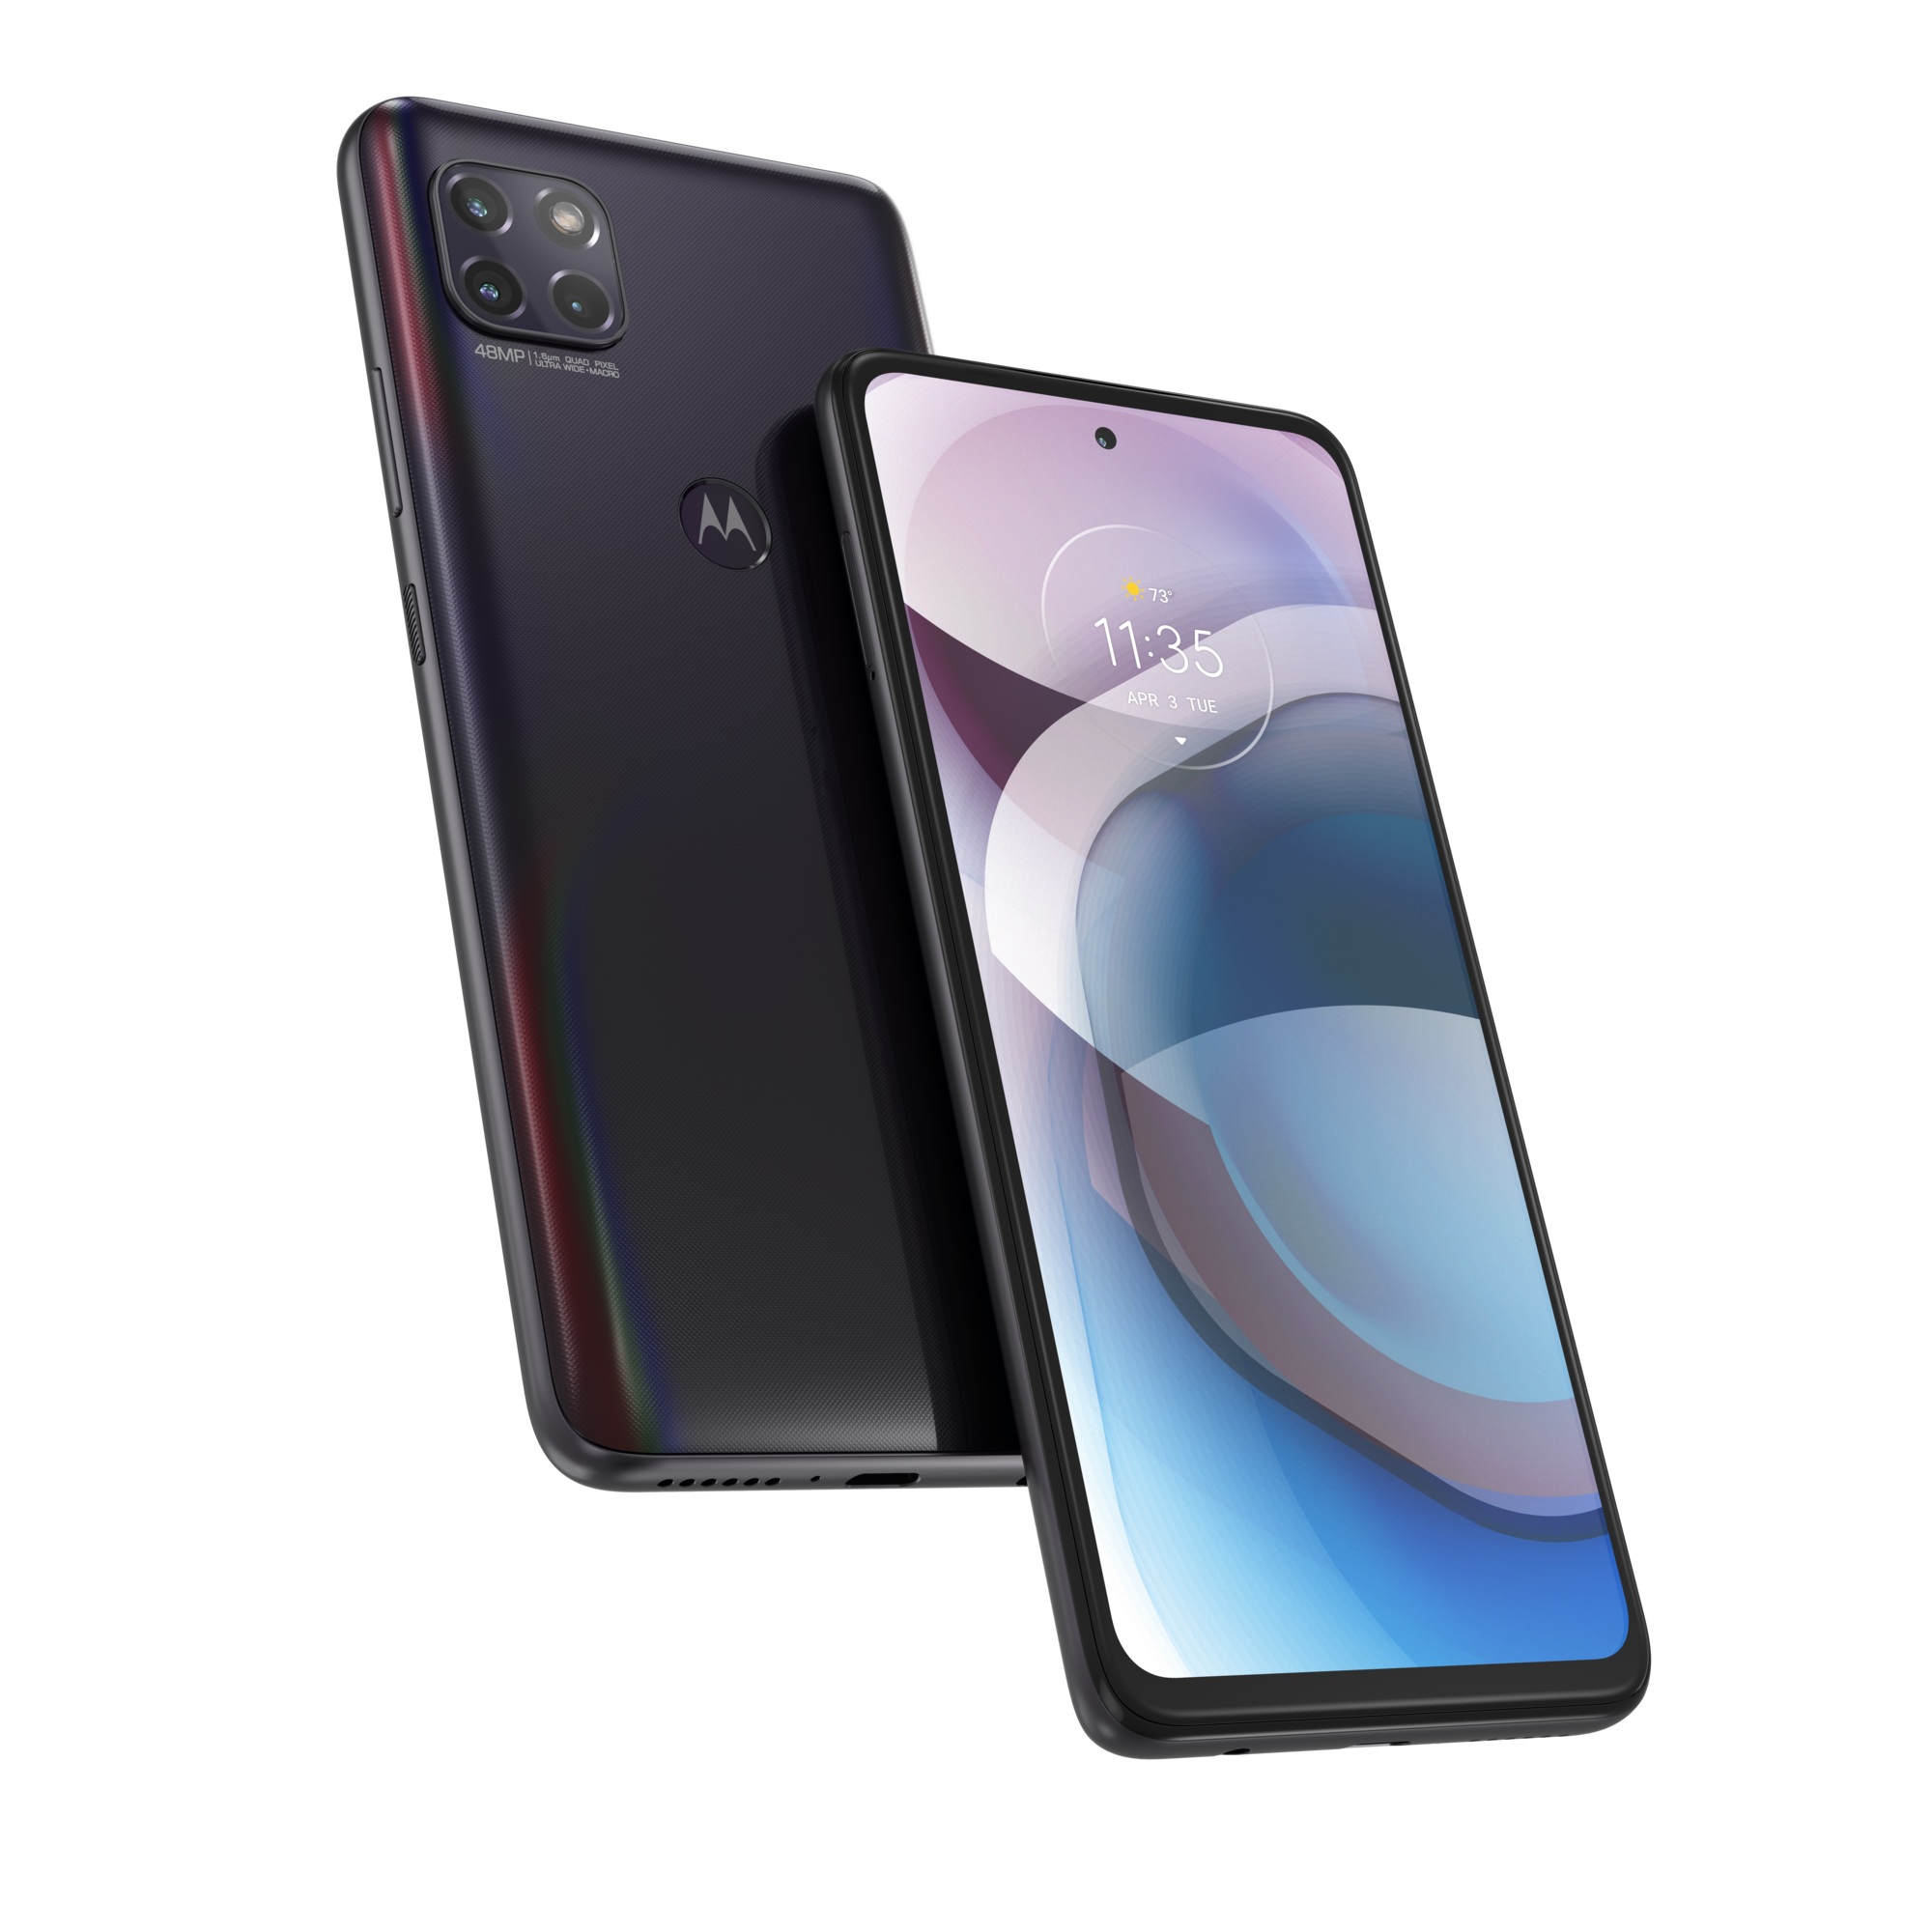 The $399 Motorola One 5G Ace is the company's cheapest 5G effort yet - Motorola launches three new G-series phones, plus their cheapest 5G model yet